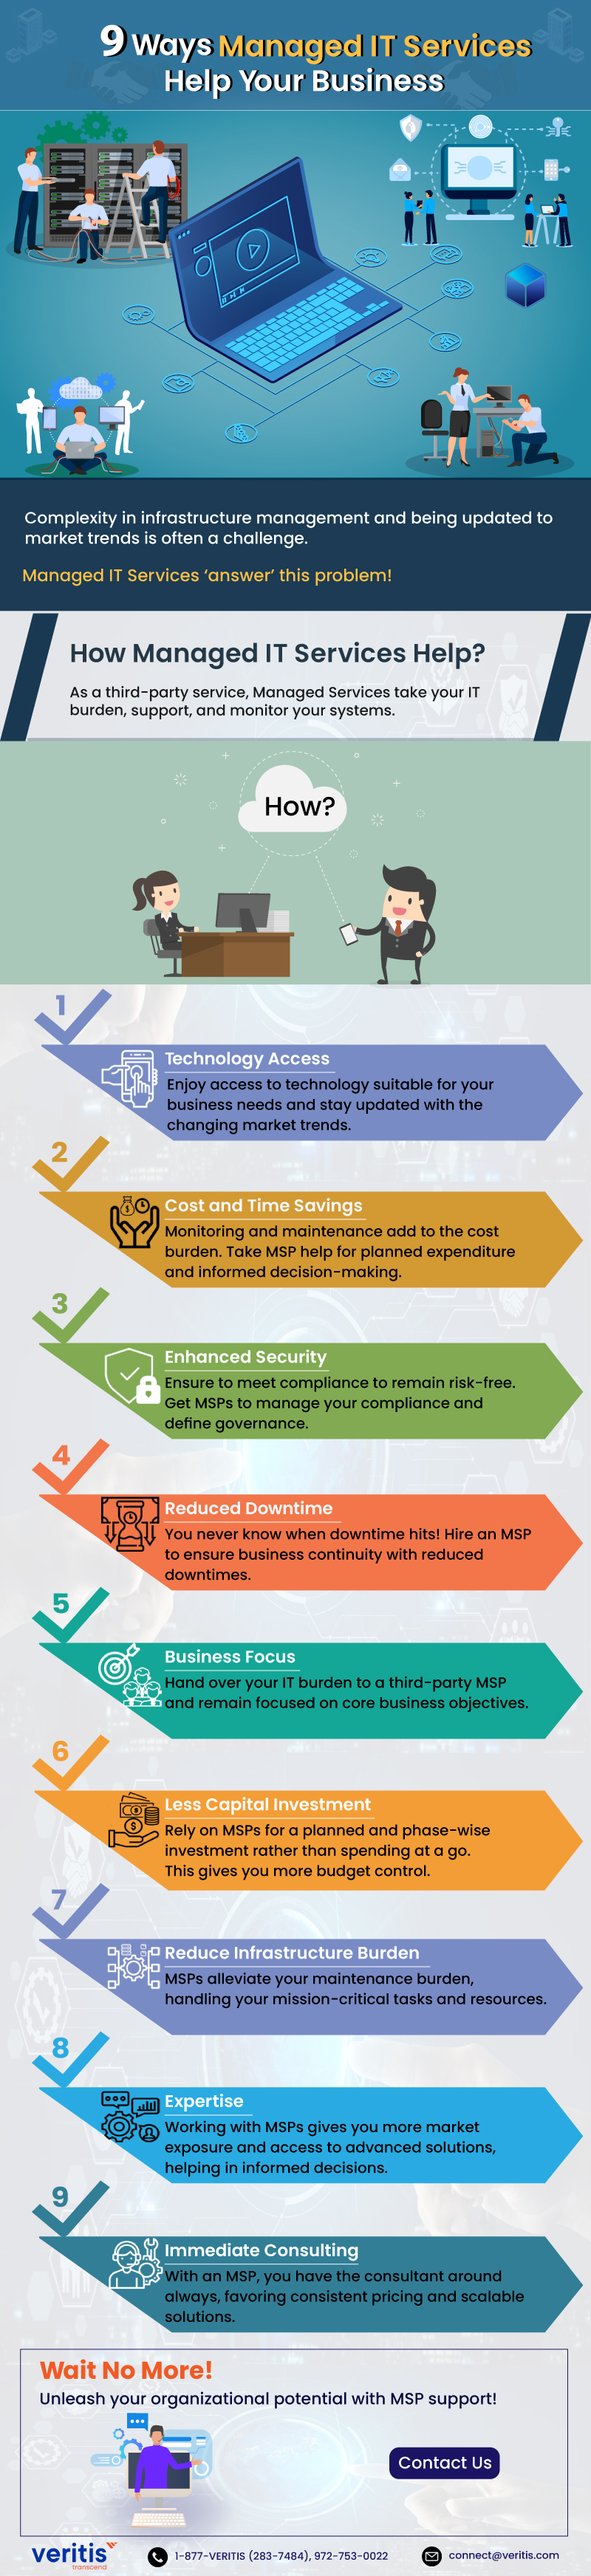 9 Ways Managed IT Services Help Your Business IT Infographic